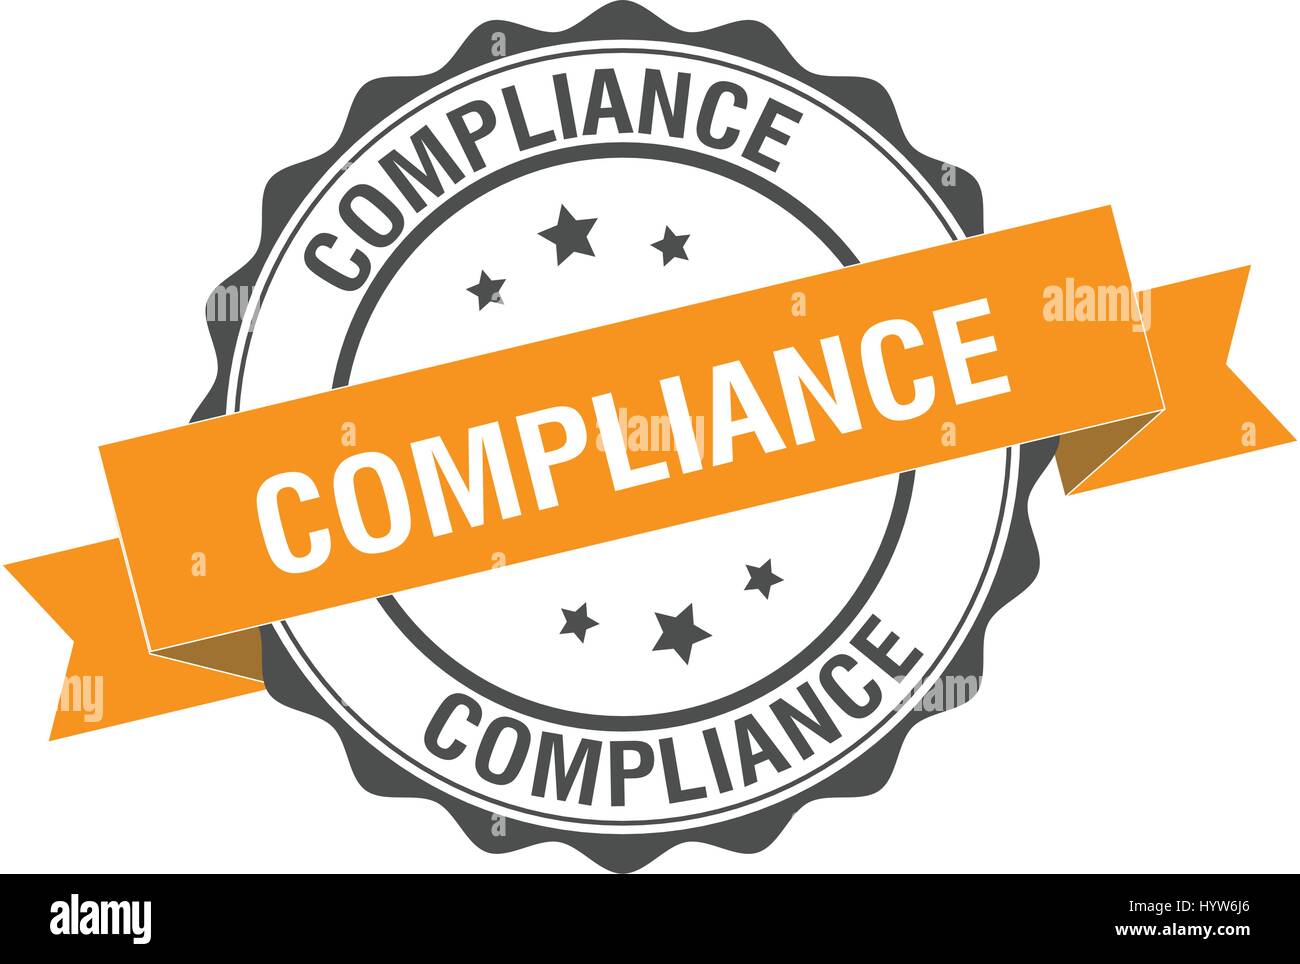 Compliance stamp illustration Stock Vector